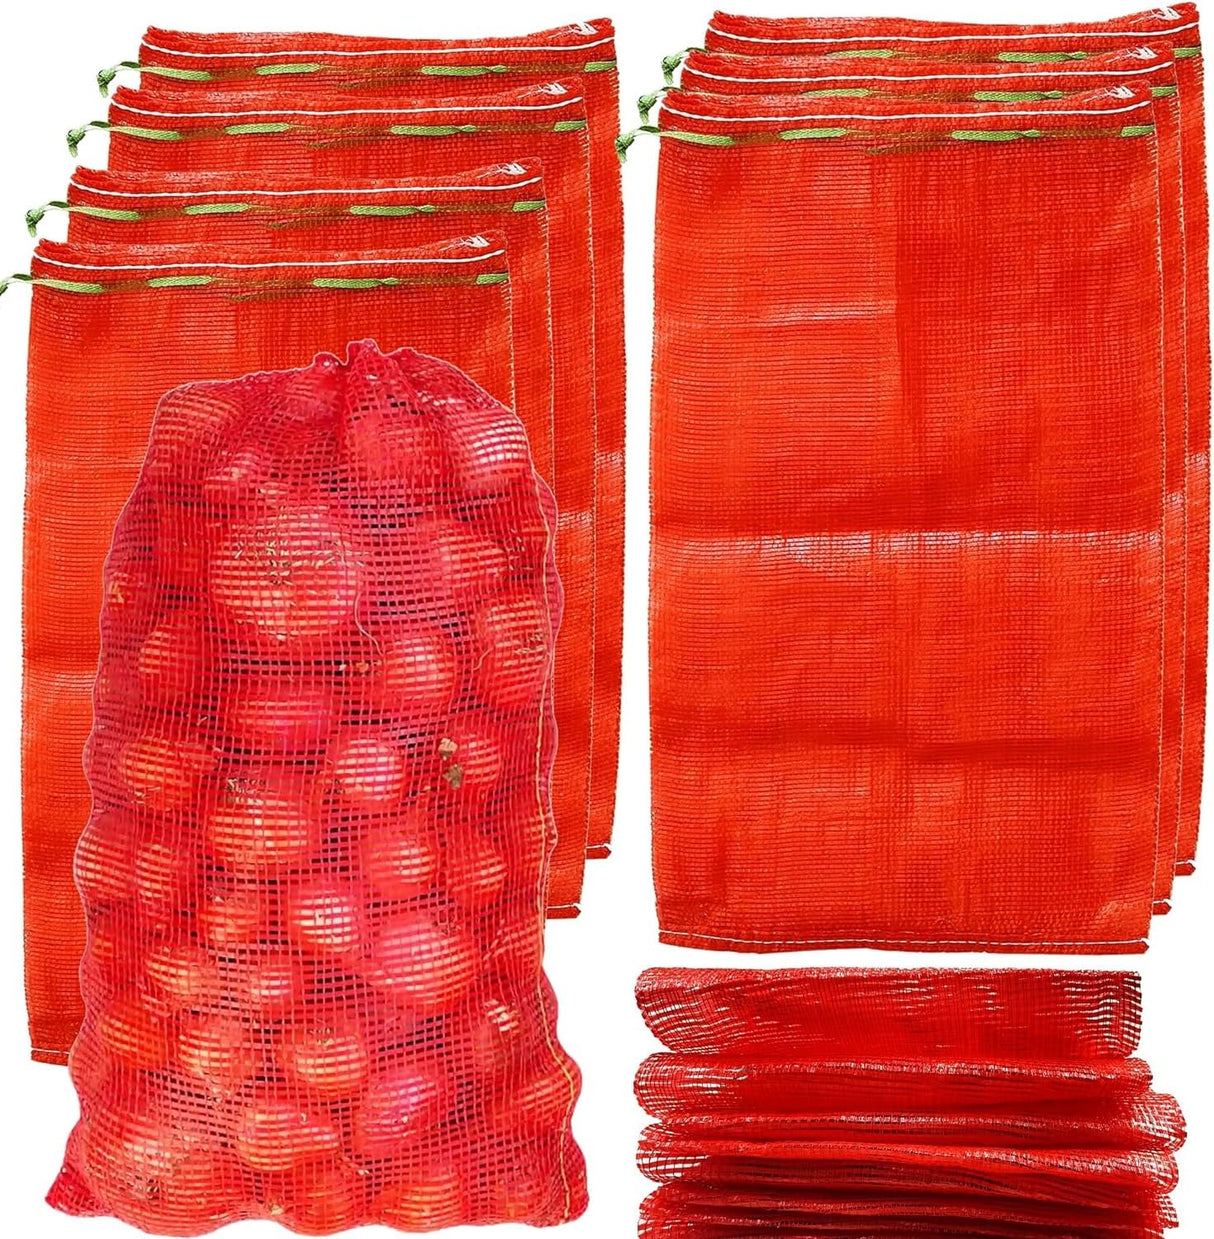 SINGHAL Leno Mesh Storage Produce Bags Reusable for Vegetable Storage Bags Onion Storage Washable Net Bags (18x33 Inch - Orange, 10)